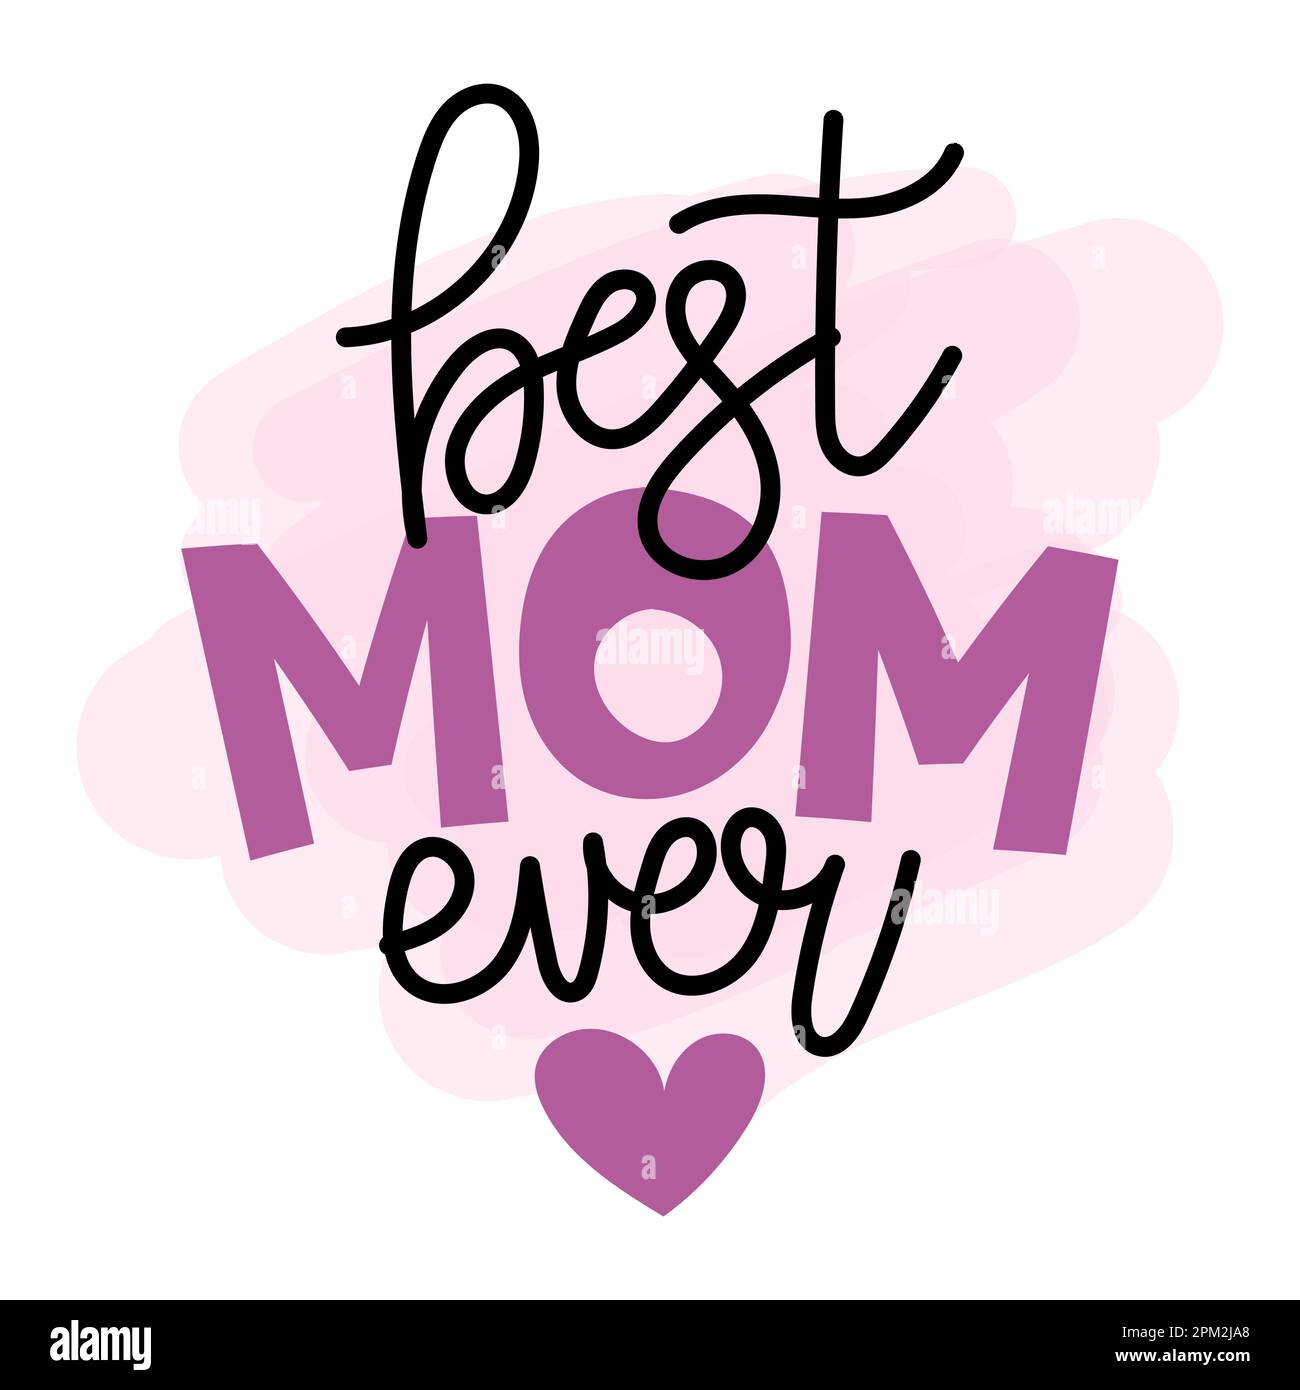 https://c8.alamy.com/comp/2PM2JA8/best-mom-ever-happy-mothers-day-lettering-handmade-calligraphy-with-my-own-handwriting-mothers-day-card-with-crown-good-for-t-shirt-mug-scrap-2PM2JA8.jpg